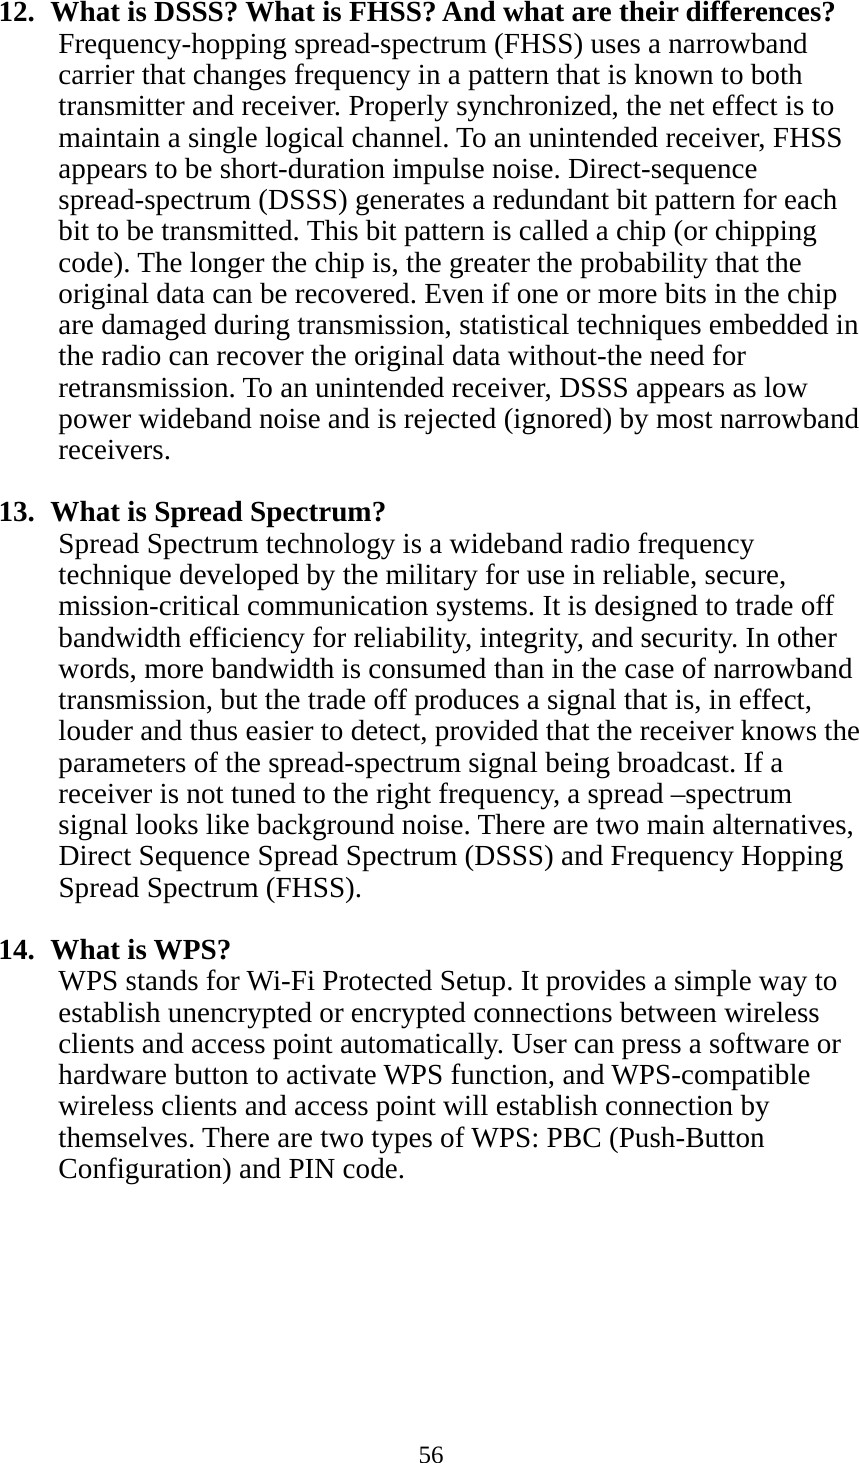 56  12.   What is DSSS? What is FHSS? And what are their differences? Frequency-hopping spread-spectrum (FHSS) uses a narrowband carrier that changes frequency in a pattern that is known to both transmitter and receiver. Properly synchronized, the net effect is to maintain a single logical channel. To an unintended receiver, FHSS appears to be short-duration impulse noise. Direct-sequence spread-spectrum (DSSS) generates a redundant bit pattern for each bit to be transmitted. This bit pattern is called a chip (or chipping code). The longer the chip is, the greater the probability that the original data can be recovered. Even if one or more bits in the chip are damaged during transmission, statistical techniques embedded in the radio can recover the original data without-the need for retransmission. To an unintended receiver, DSSS appears as low power wideband noise and is rejected (ignored) by most narrowband receivers.  13.   What is Spread Spectrum? Spread Spectrum technology is a wideband radio frequency technique developed by the military for use in reliable, secure, mission-critical communication systems. It is designed to trade off bandwidth efficiency for reliability, integrity, and security. In other words, more bandwidth is consumed than in the case of narrowband transmission, but the trade off produces a signal that is, in effect, louder and thus easier to detect, provided that the receiver knows the parameters of the spread-spectrum signal being broadcast. If a receiver is not tuned to the right frequency, a spread –spectrum signal looks like background noise. There are two main alternatives, Direct Sequence Spread Spectrum (DSSS) and Frequency Hopping Spread Spectrum (FHSS).  14.  What is WPS? WPS stands for Wi-Fi Protected Setup. It provides a simple way to establish unencrypted or encrypted connections between wireless clients and access point automatically. User can press a software or hardware button to activate WPS function, and WPS-compatible wireless clients and access point will establish connection by themselves. There are two types of WPS: PBC (Push-Button Configuration) and PIN code.  